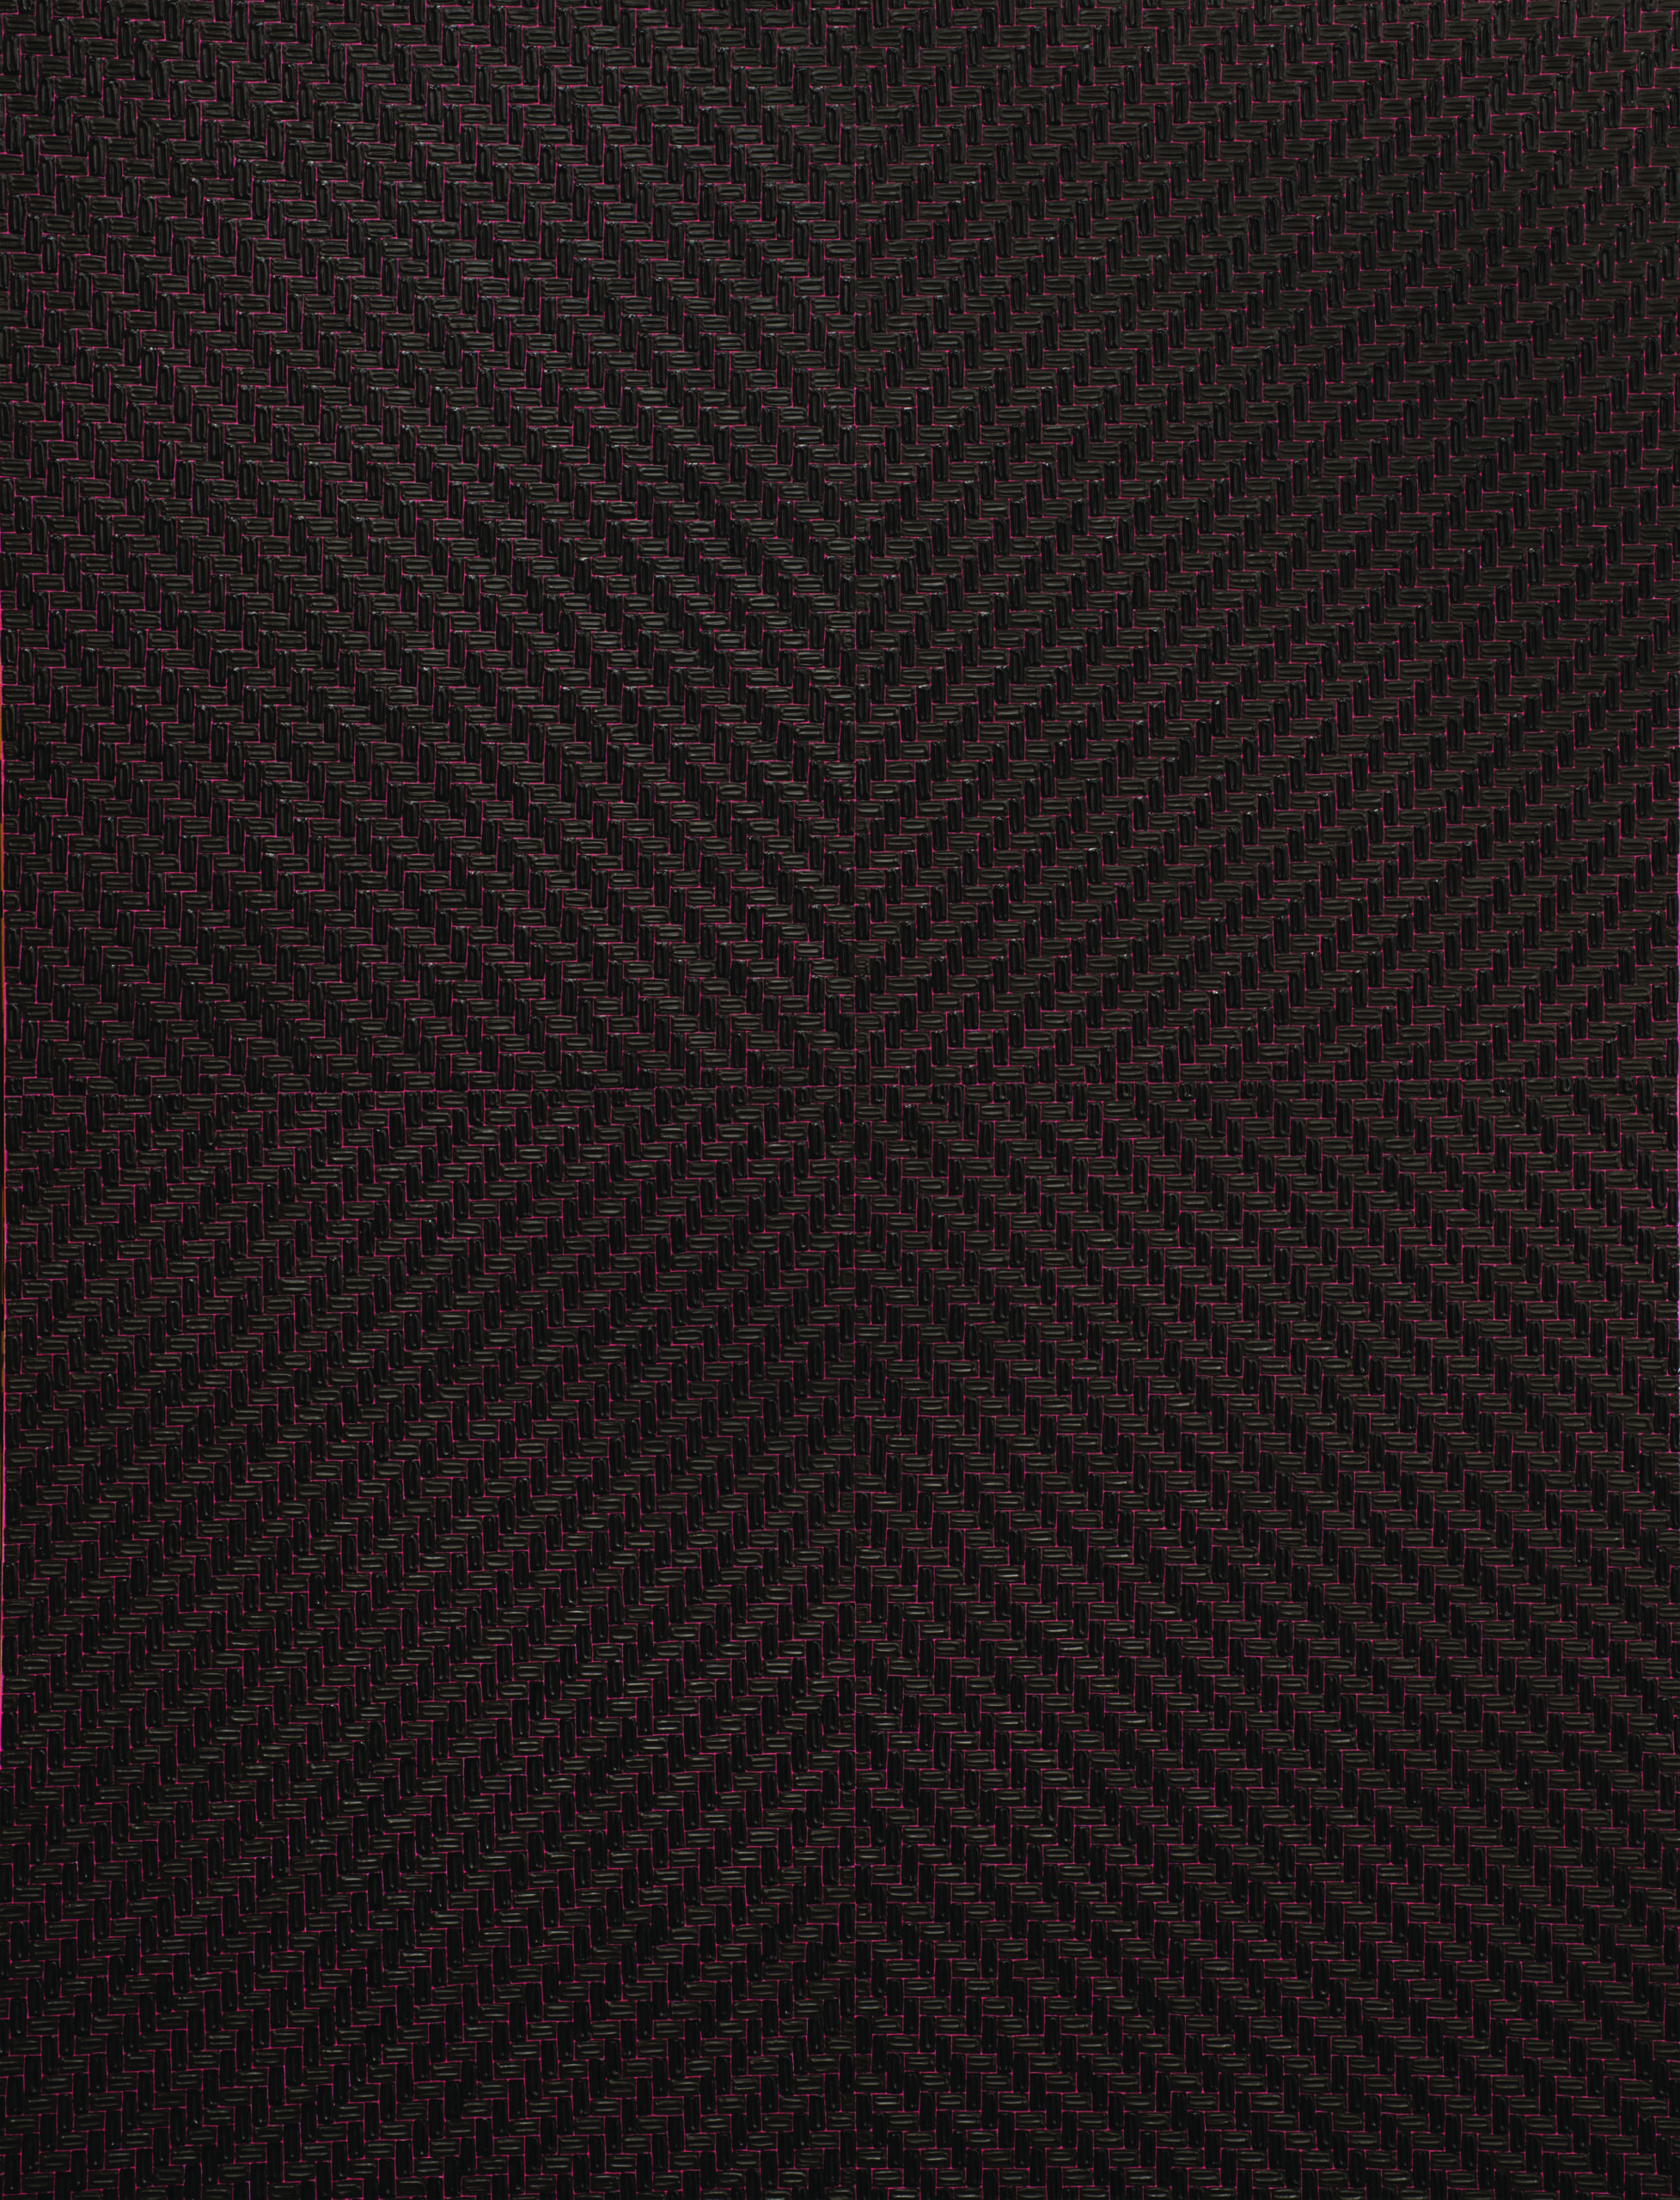 A vertical rectangle with a dense, textile-like pattern is divided into quadrants. Evenly sized, lozenge-shaped dark brushstrokes radiate out diagonally from a center point, nearly hiding a bright pink ground.